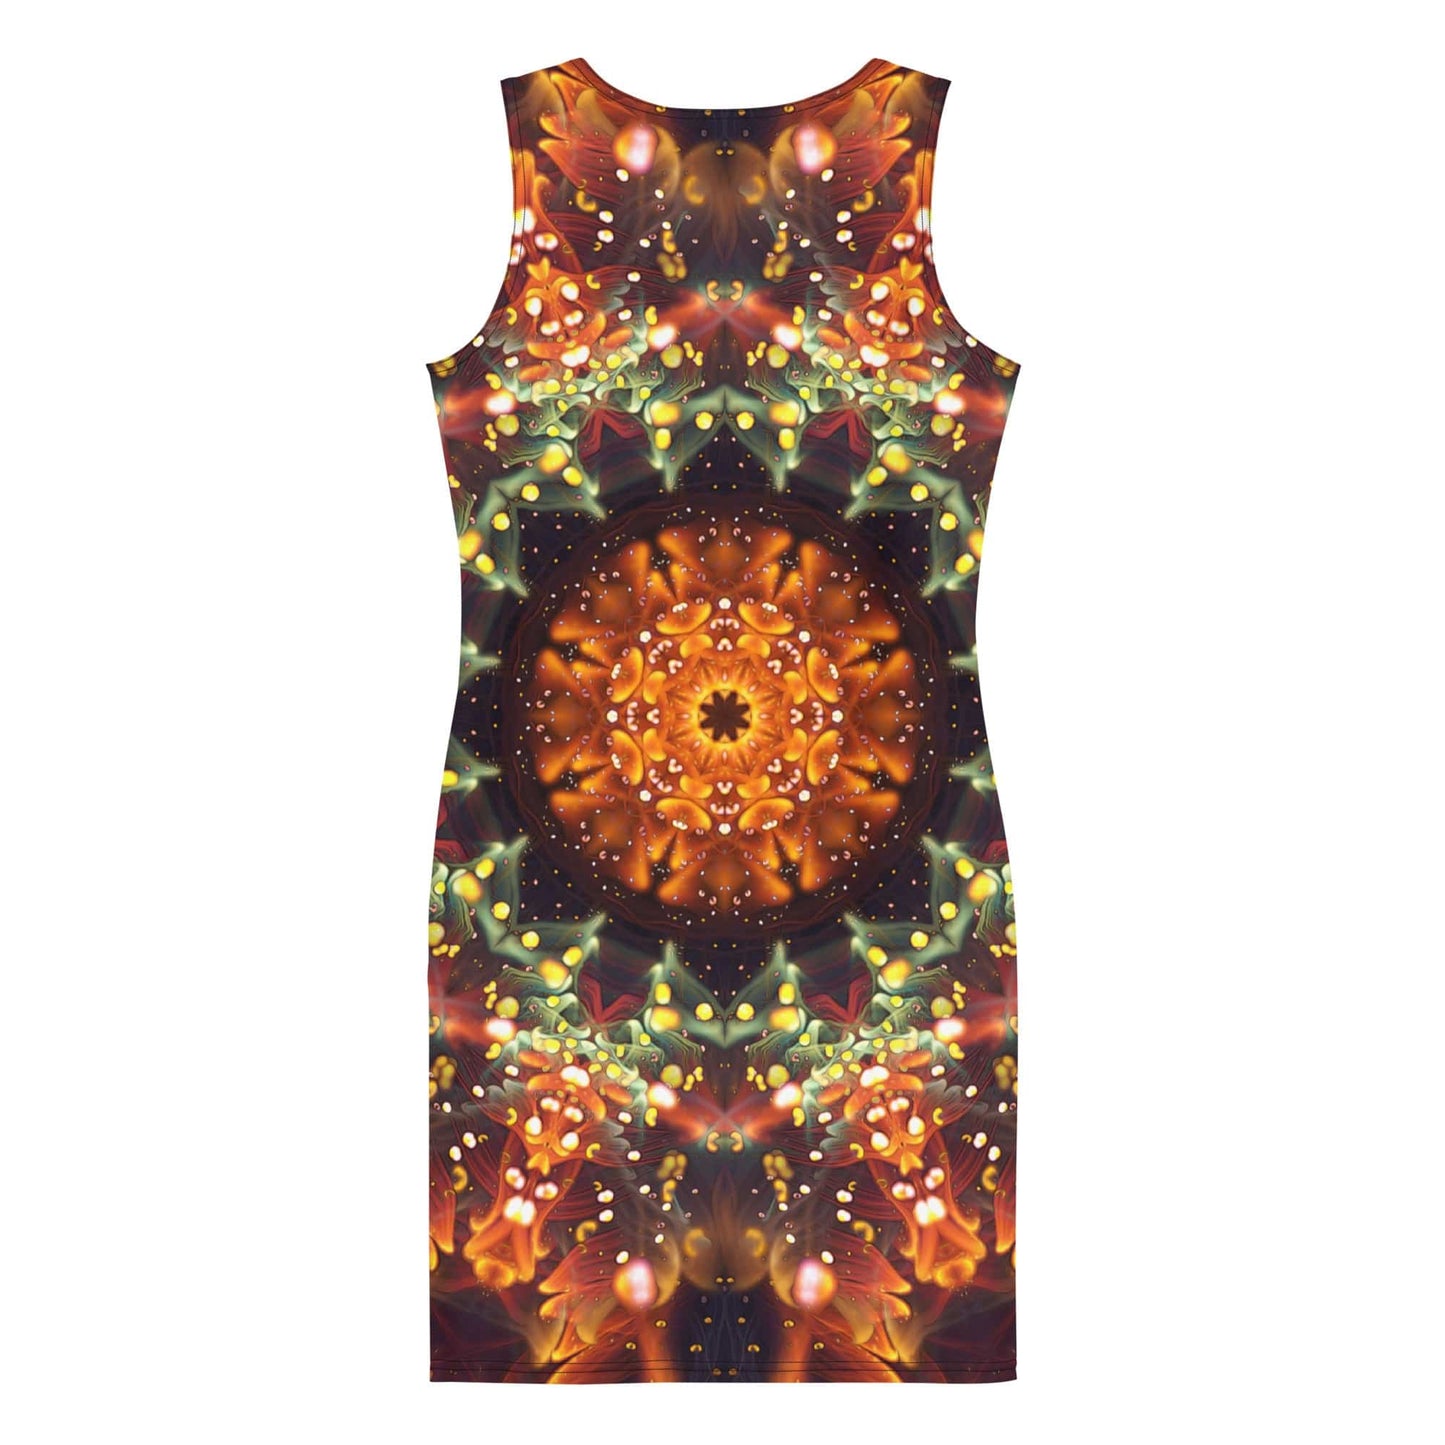 "Autumn Bloom" Bodycon FITTED DRESS